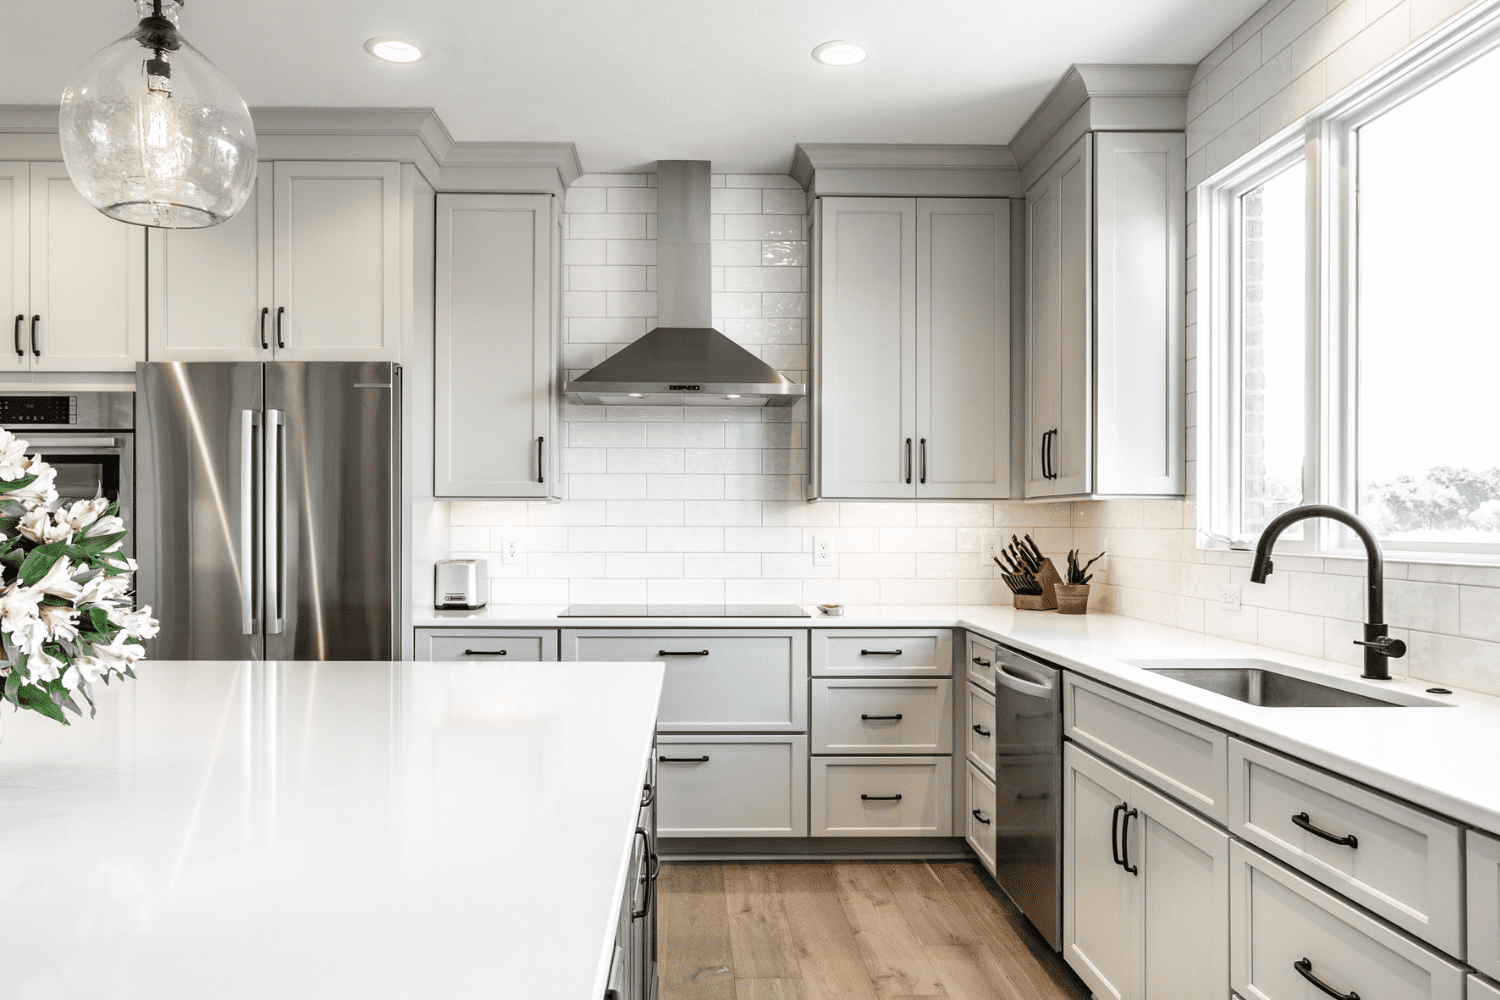 Nicholas Design Build | A kitchen with gray cabinets and white counter tops.